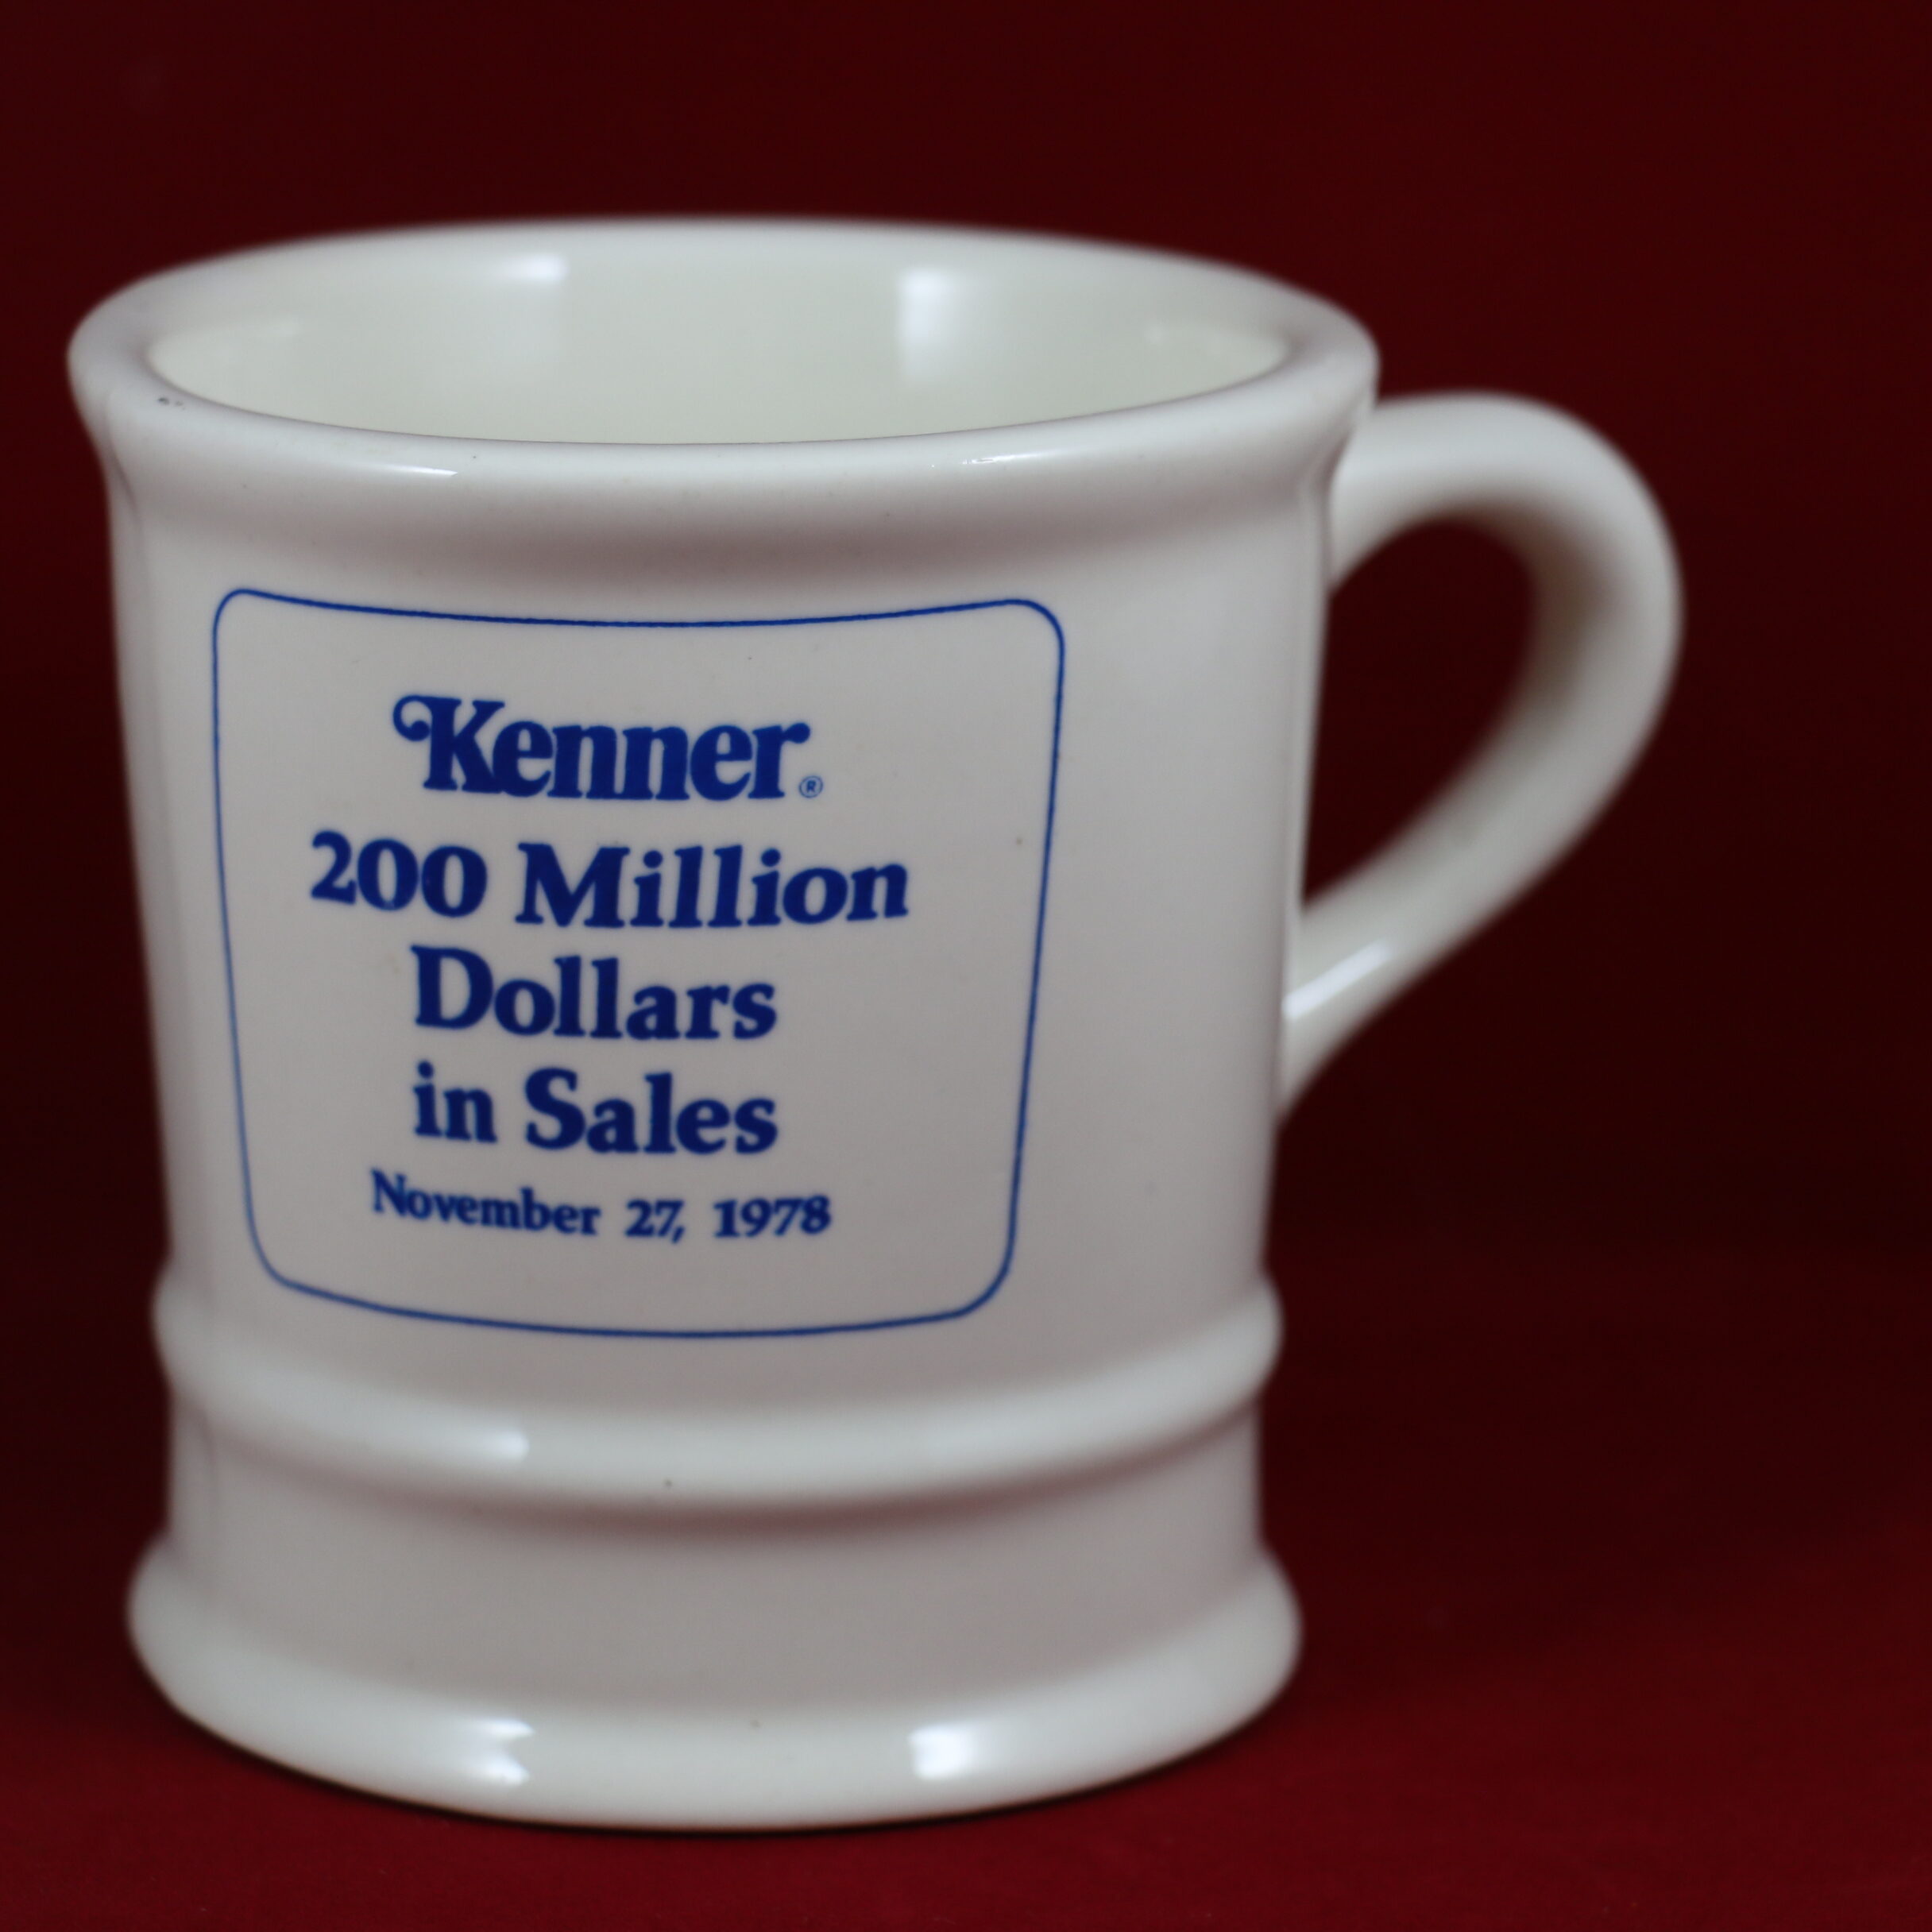 Kenner $200 Million Sales Mug Given To Employees To Celebrate